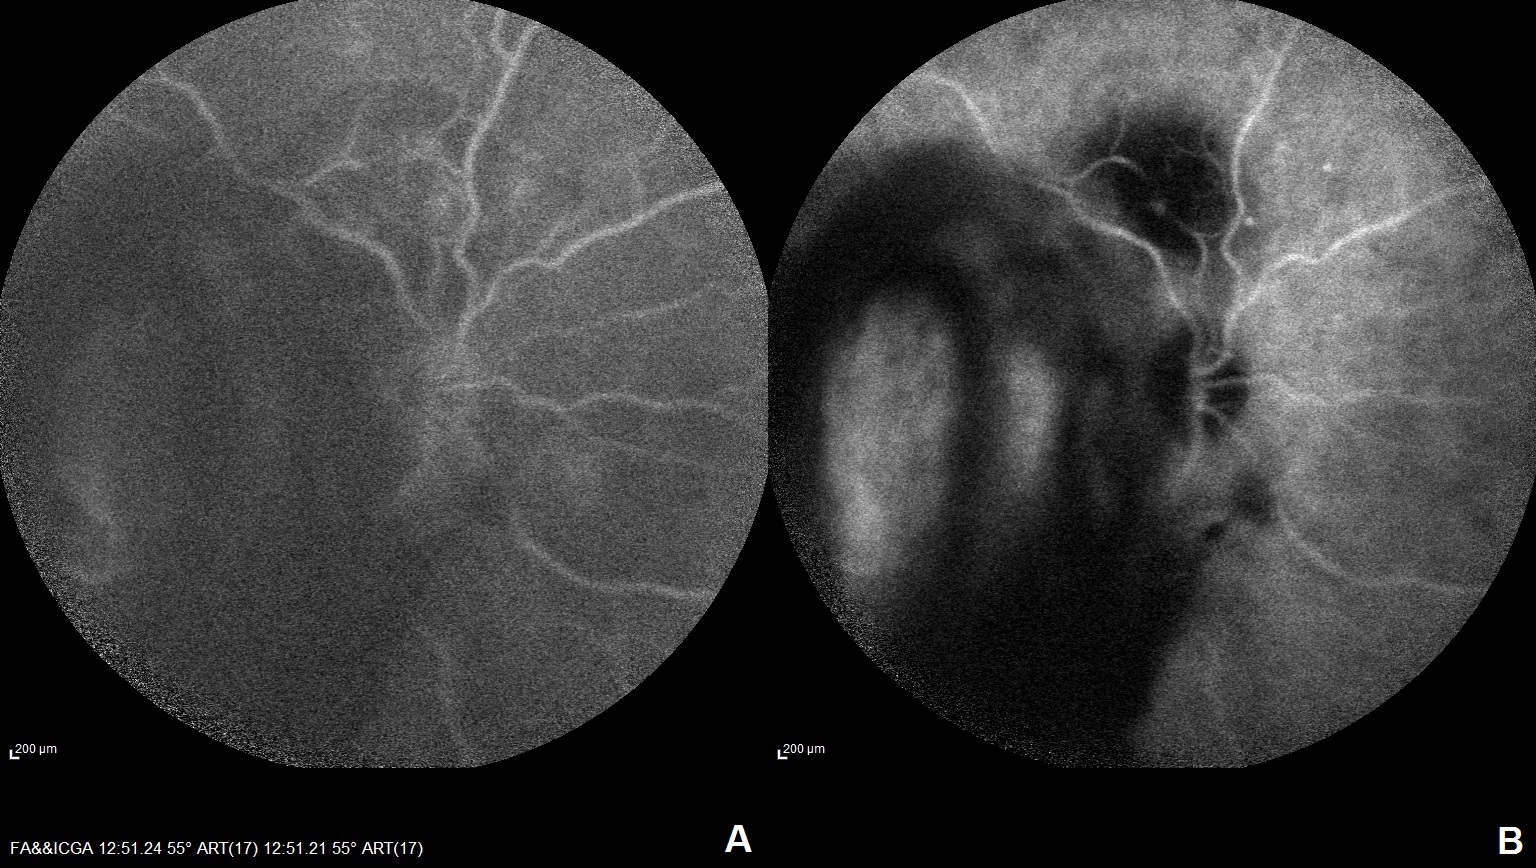 FA (A) and ICGA (B) of the right eye of a patient with RAM at superotemporal arcade with vitreous hemorrhage